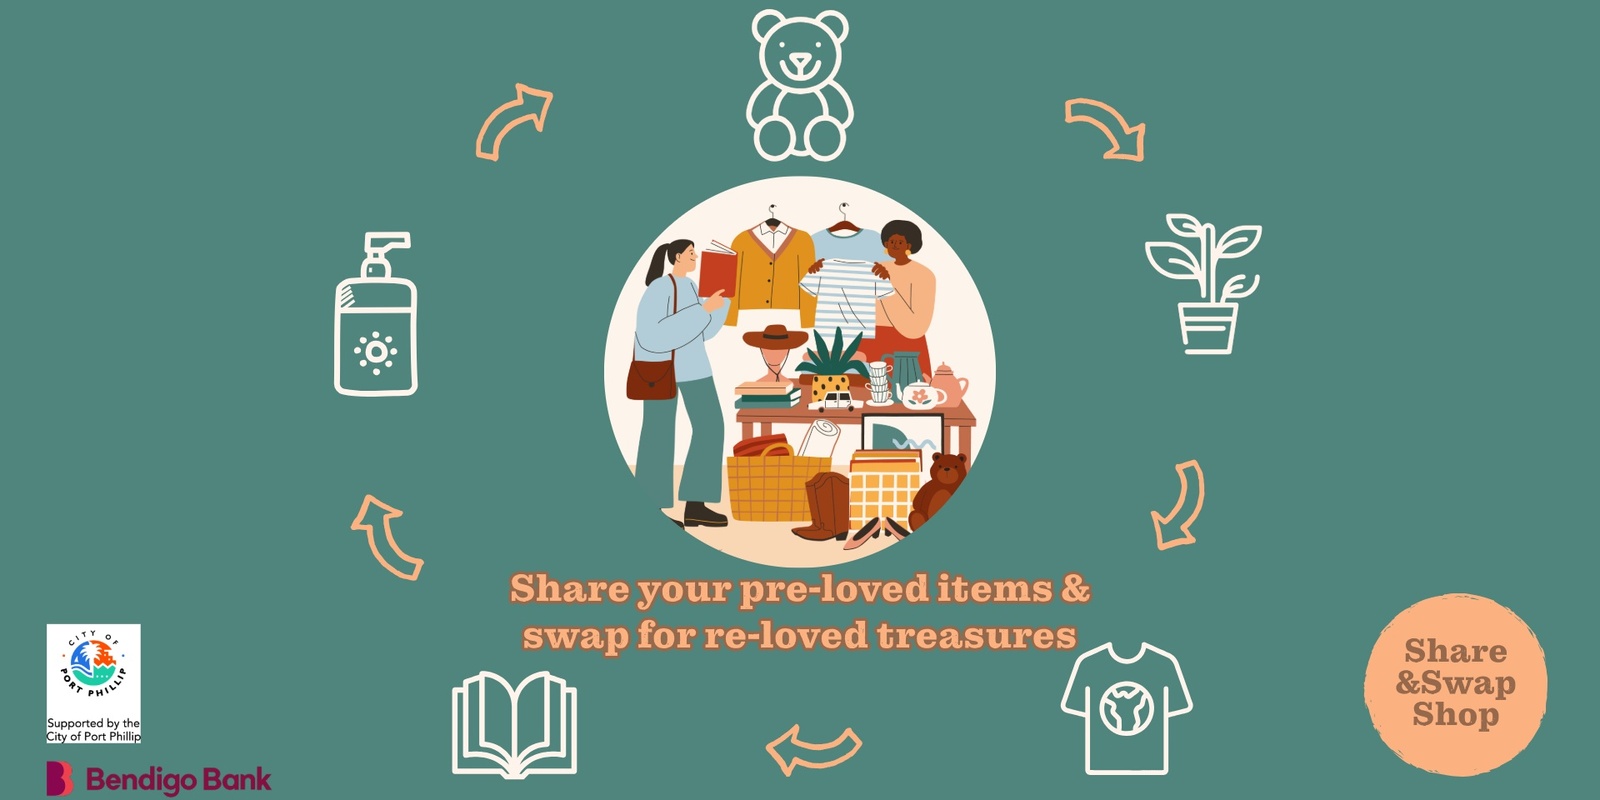 Banner image for Share&Swap Shop | Share your pre-loved items and swap for re-loved treasures | St Kilda Library